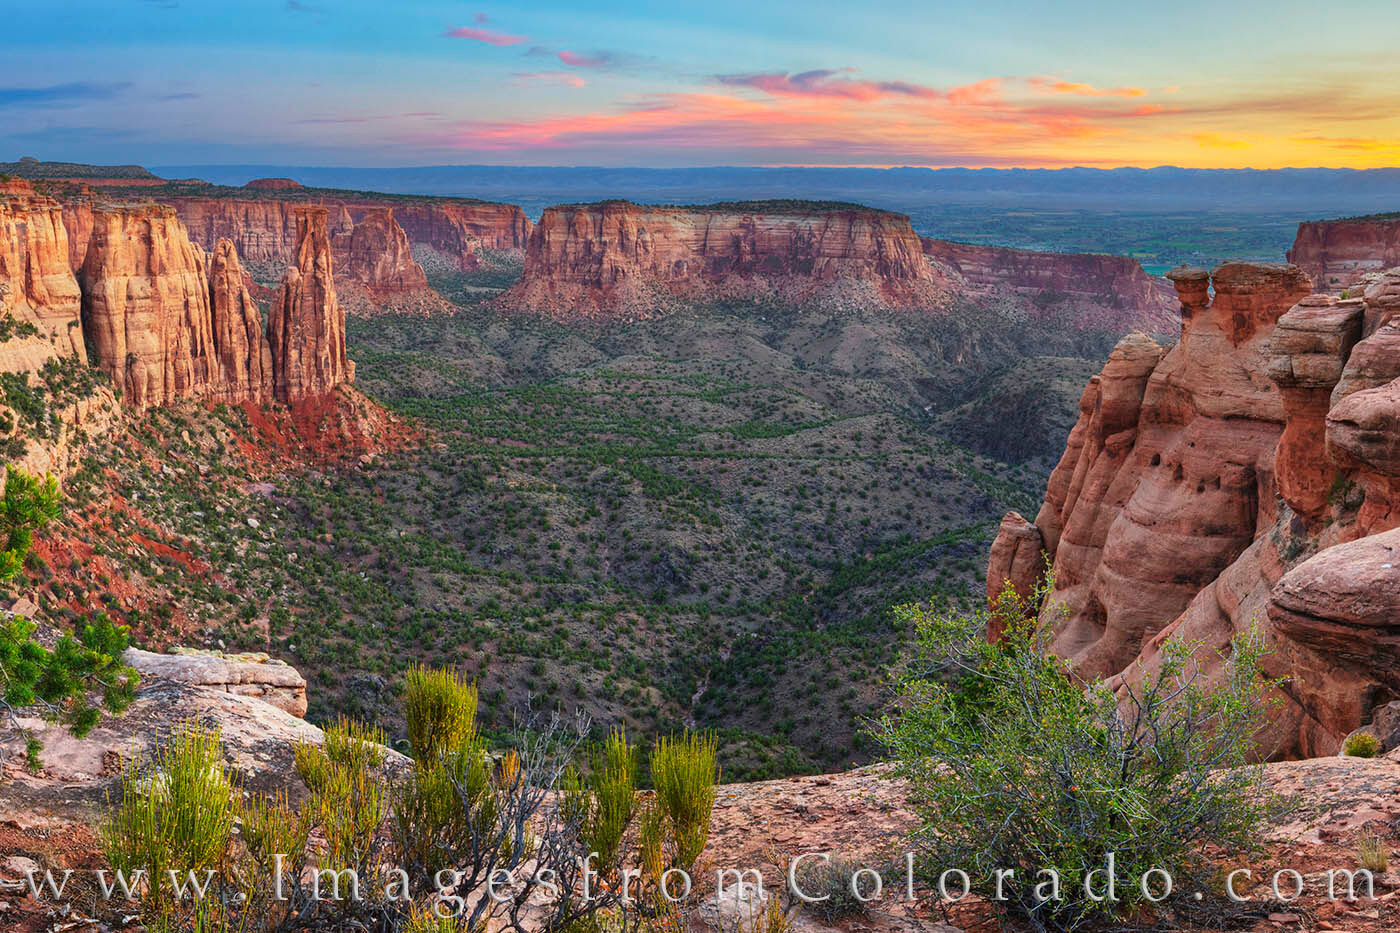 On a perfect summer morning, Monument Canyon welcomes the first light of day. From a rock cliff high above the valley below...